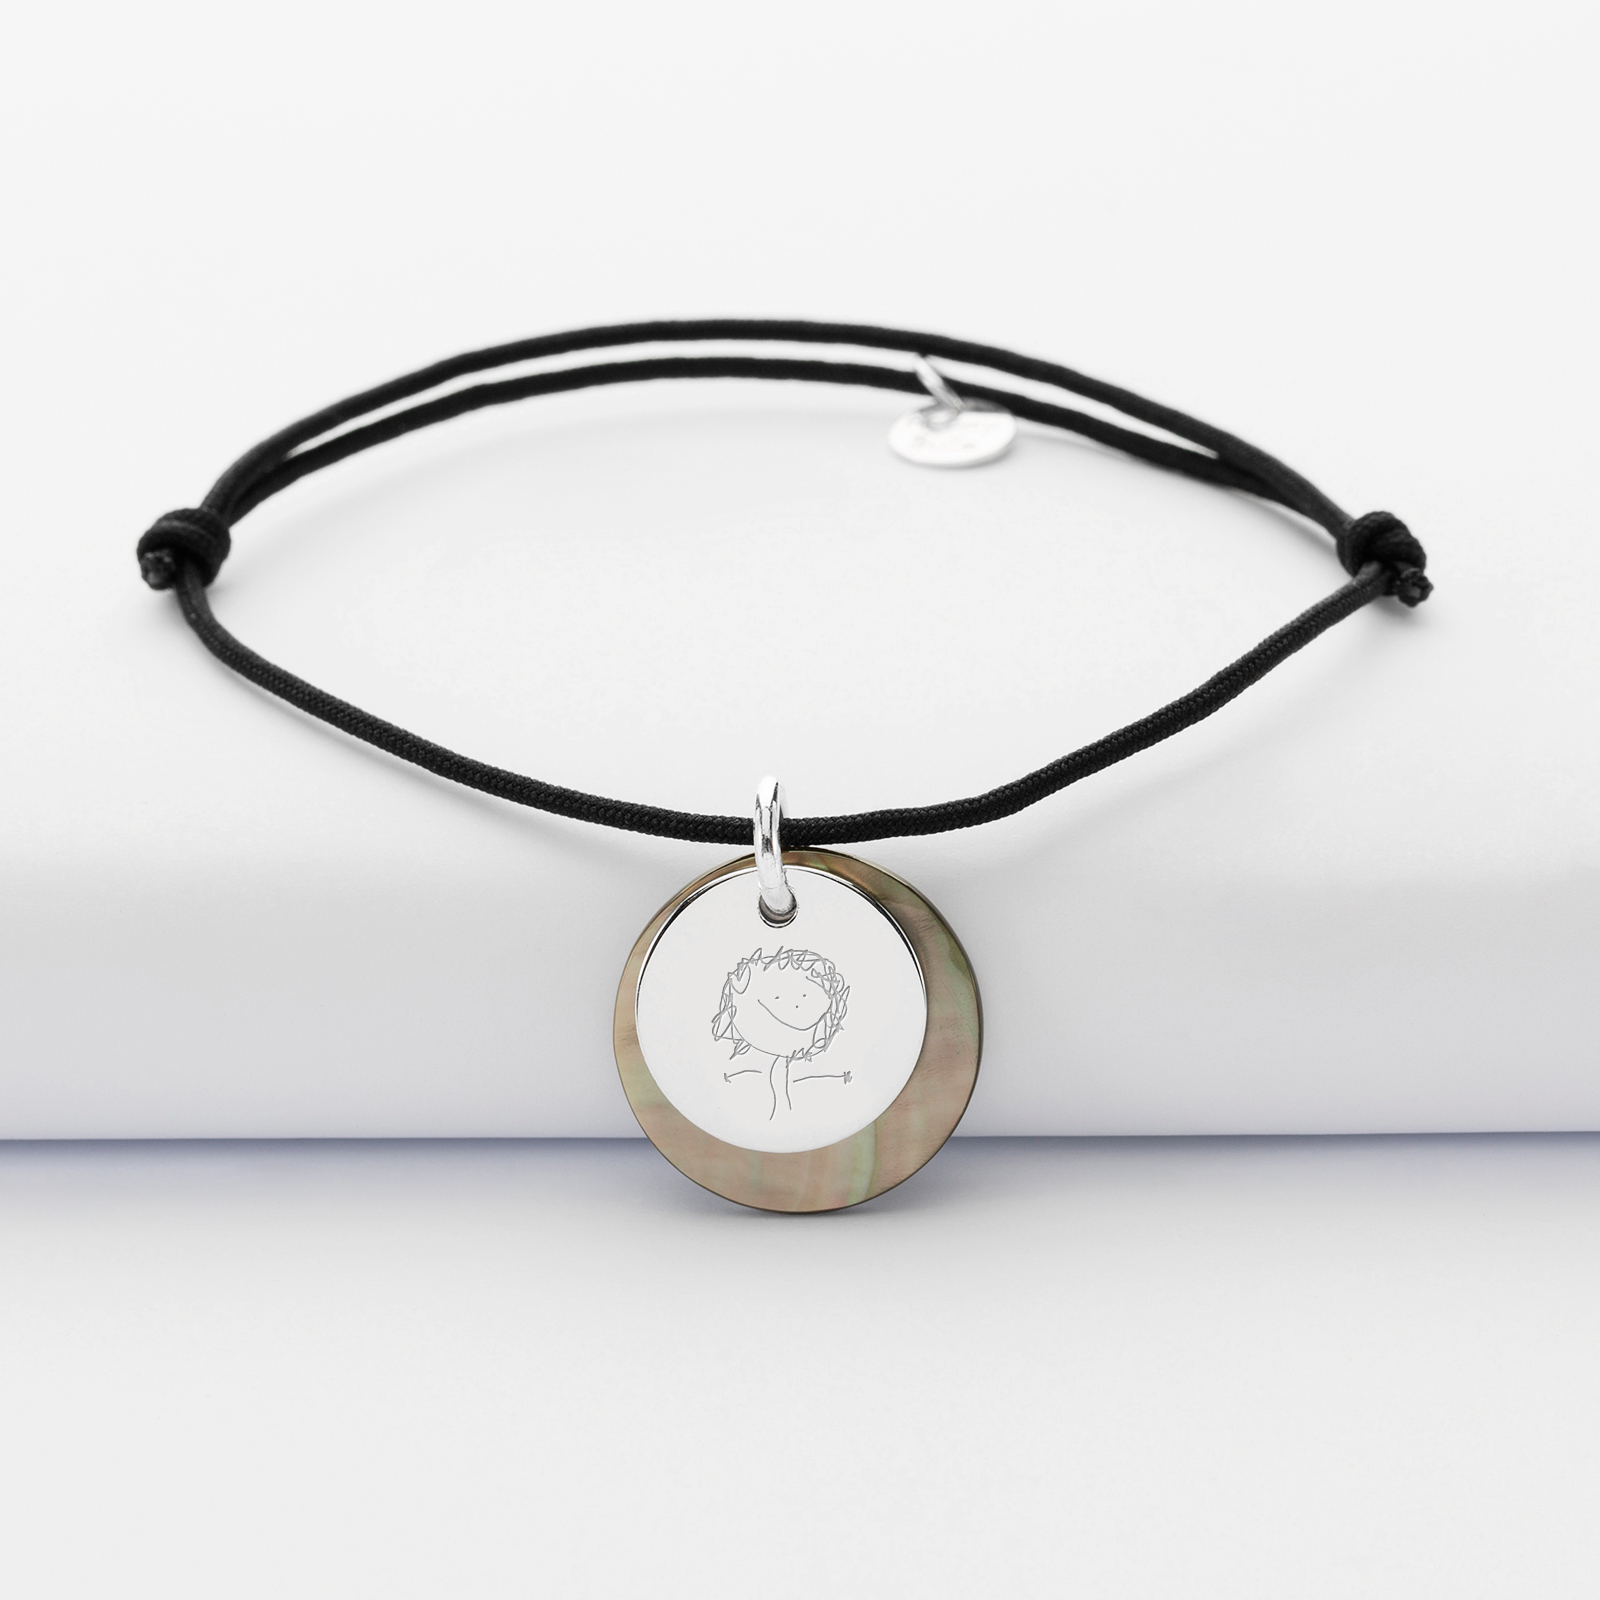 Personalised mother of pearl 19 mm bracelet charm and engraved silver medallion 15 mm - sketch